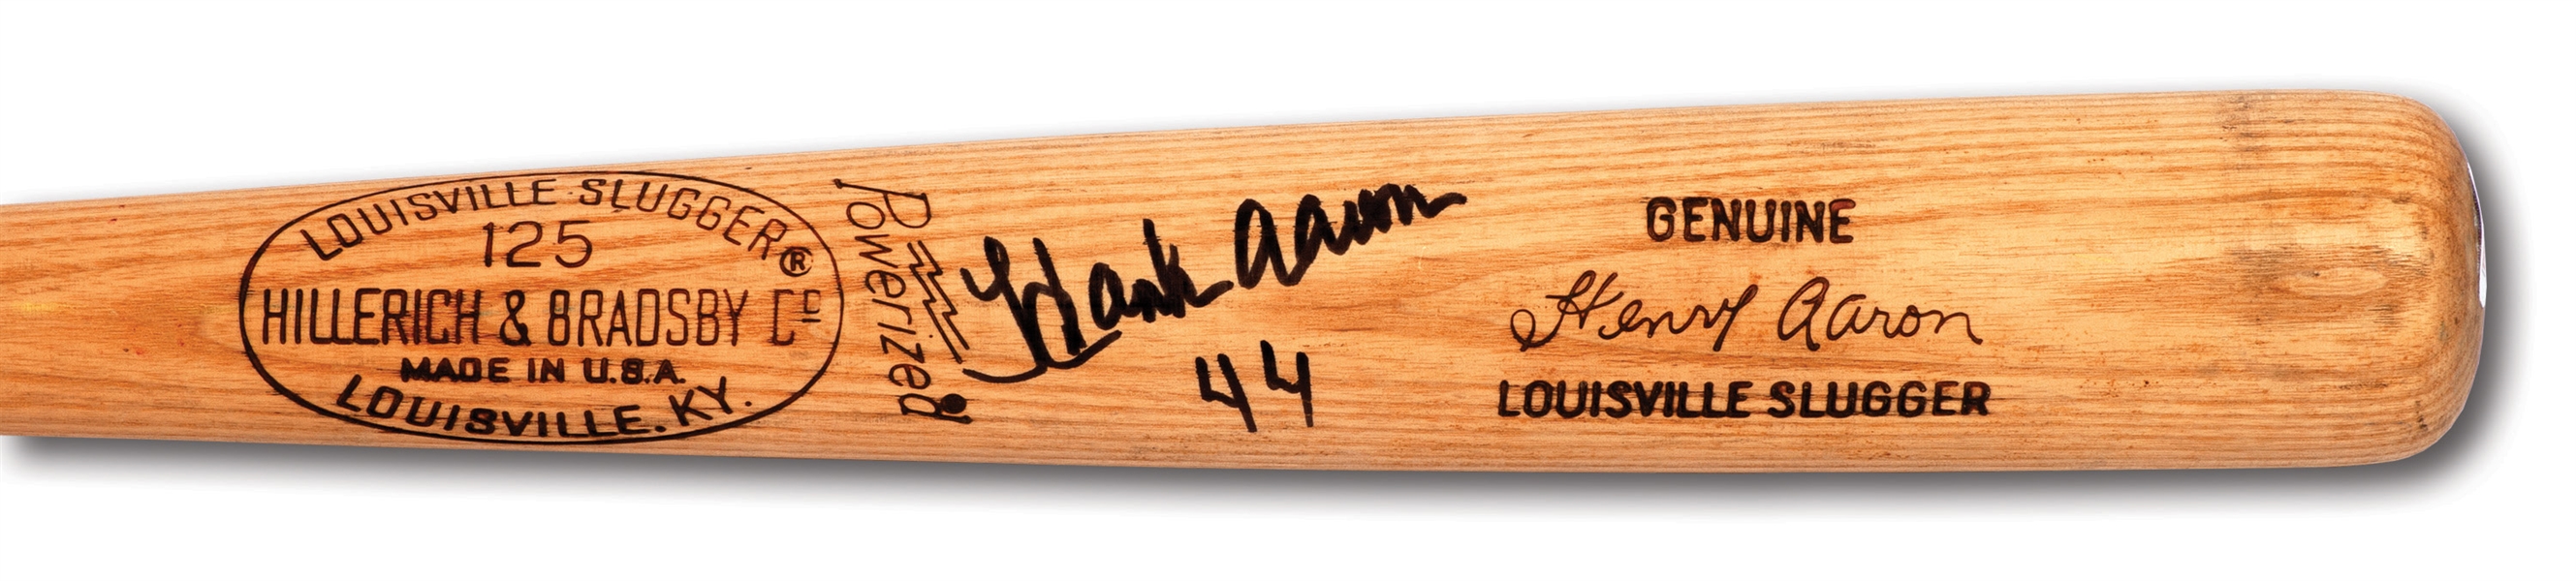 1974-75 HANK AARON AUTOGRAPHED H&B PROFESSIONAL MODEL A99 GAME USED BAT FROM ERA HE HIT #715 TO PASS RUTH (PSA/DNA GU 7)